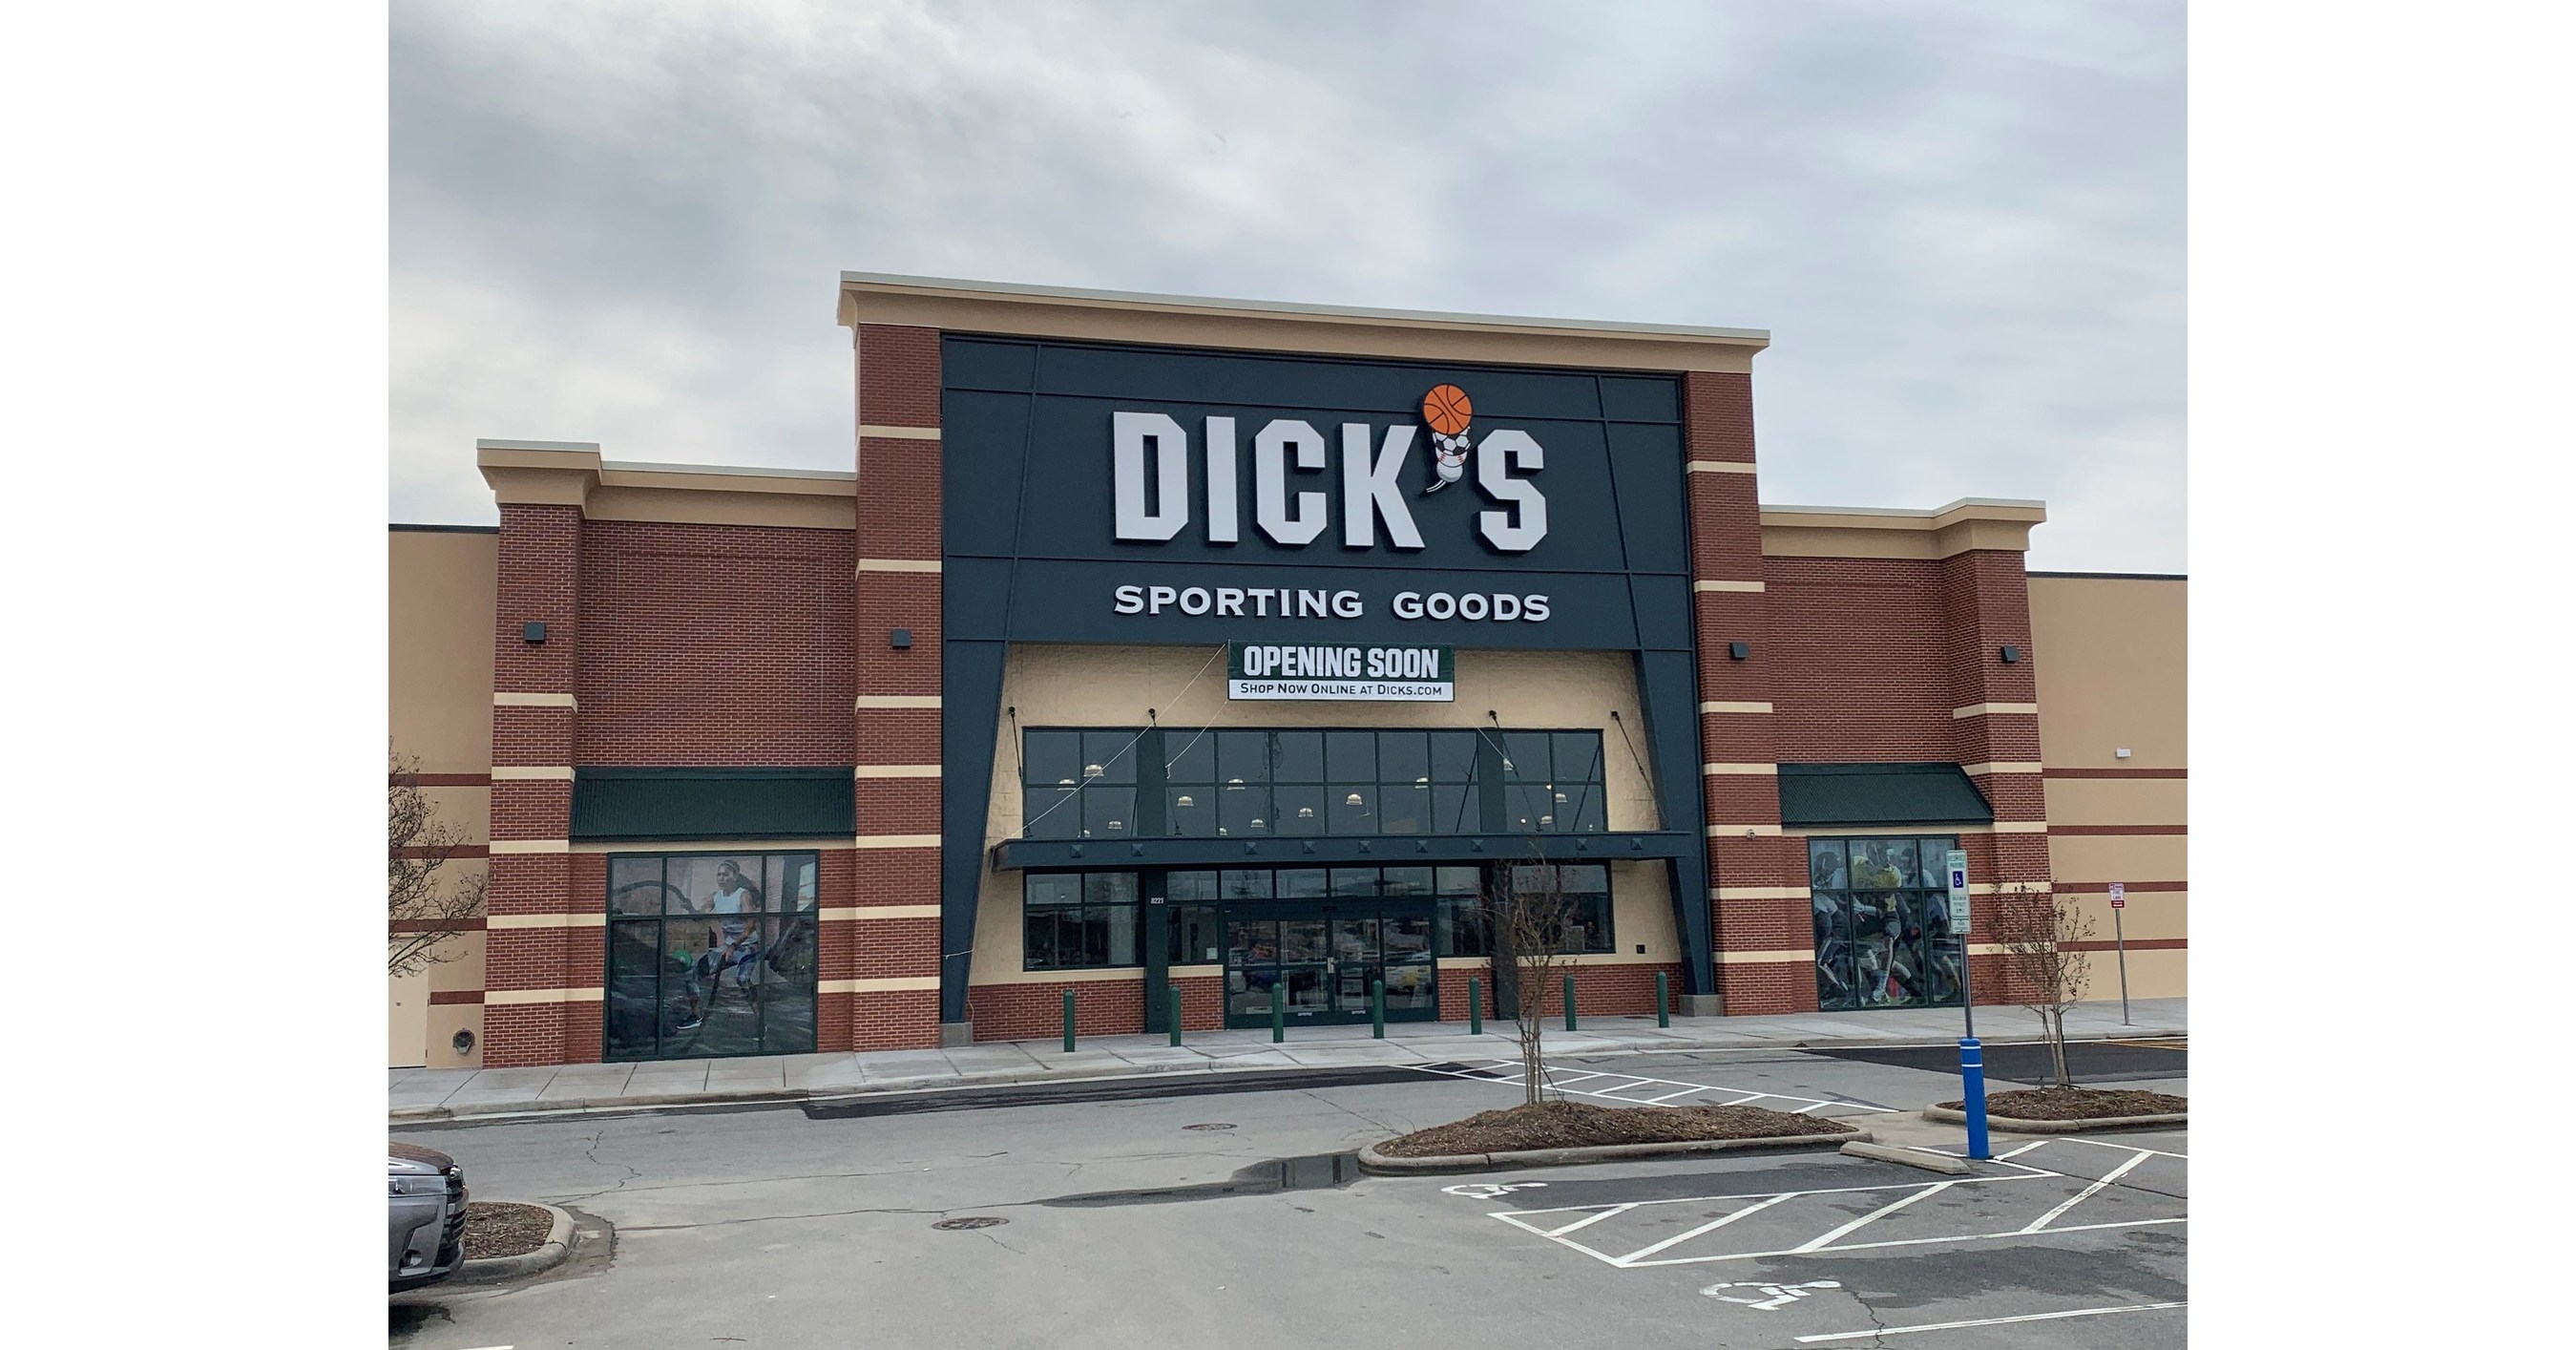 Dicks Sporting Items Declares Grand Opening Of 5 Shops In 5 States In